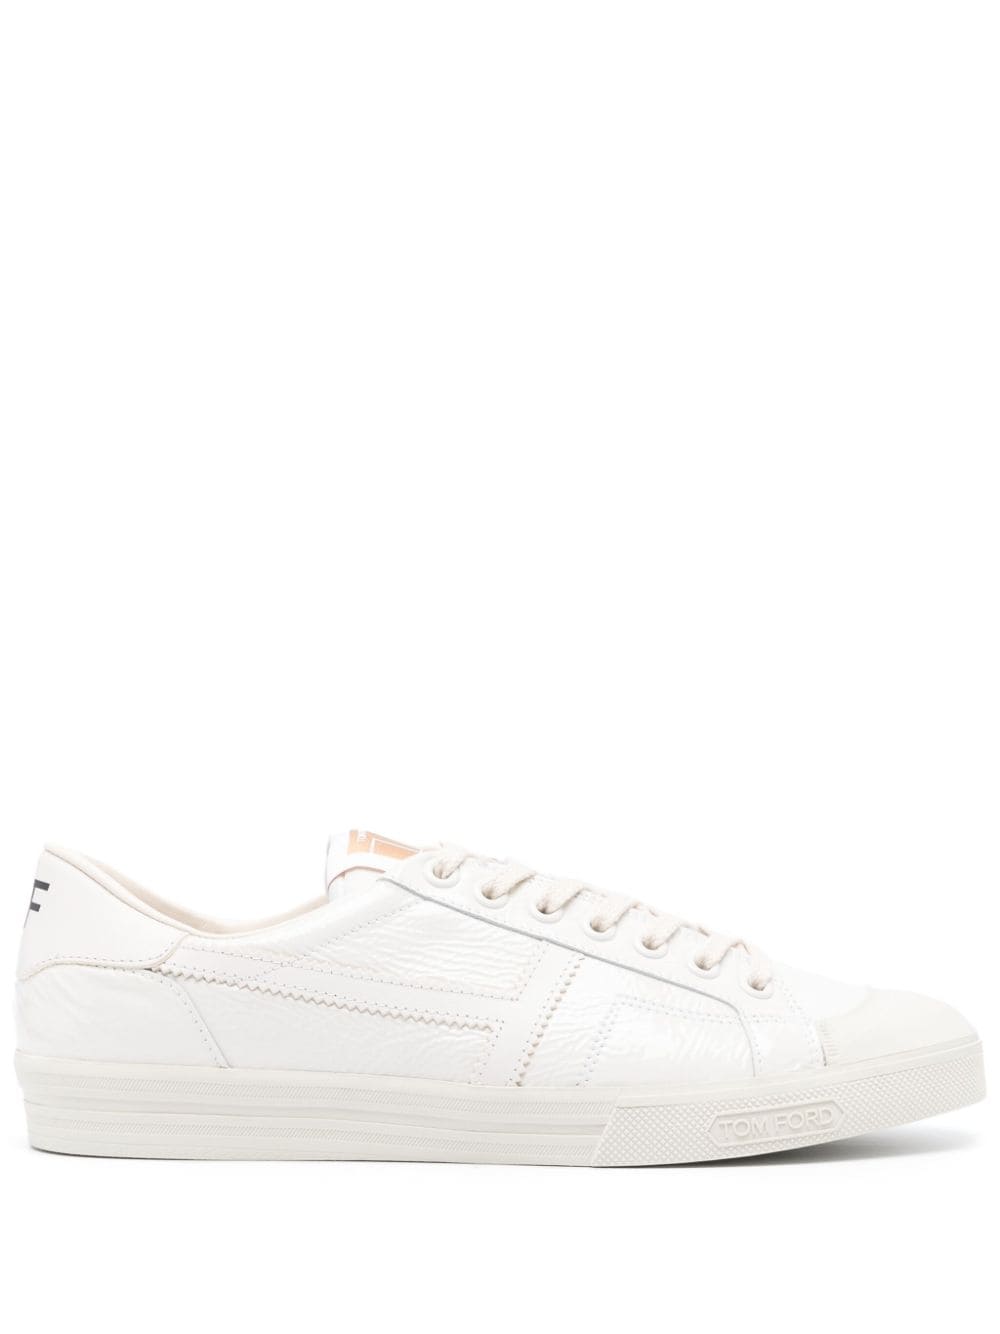 TOM FORD Jarvis leather sneakers - Bianco